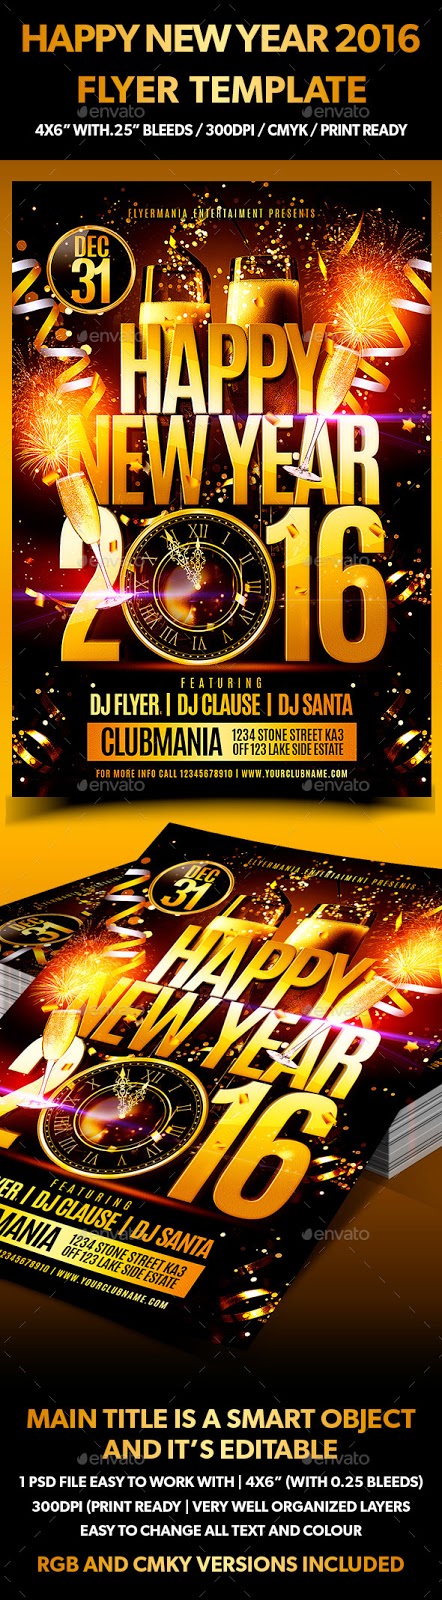 http://graphicriver.net/item/happy-new-year-2016-flyer-template/13691547?s_phrase=happy+new+year+2016&s_rank=14&ref=Newenvato